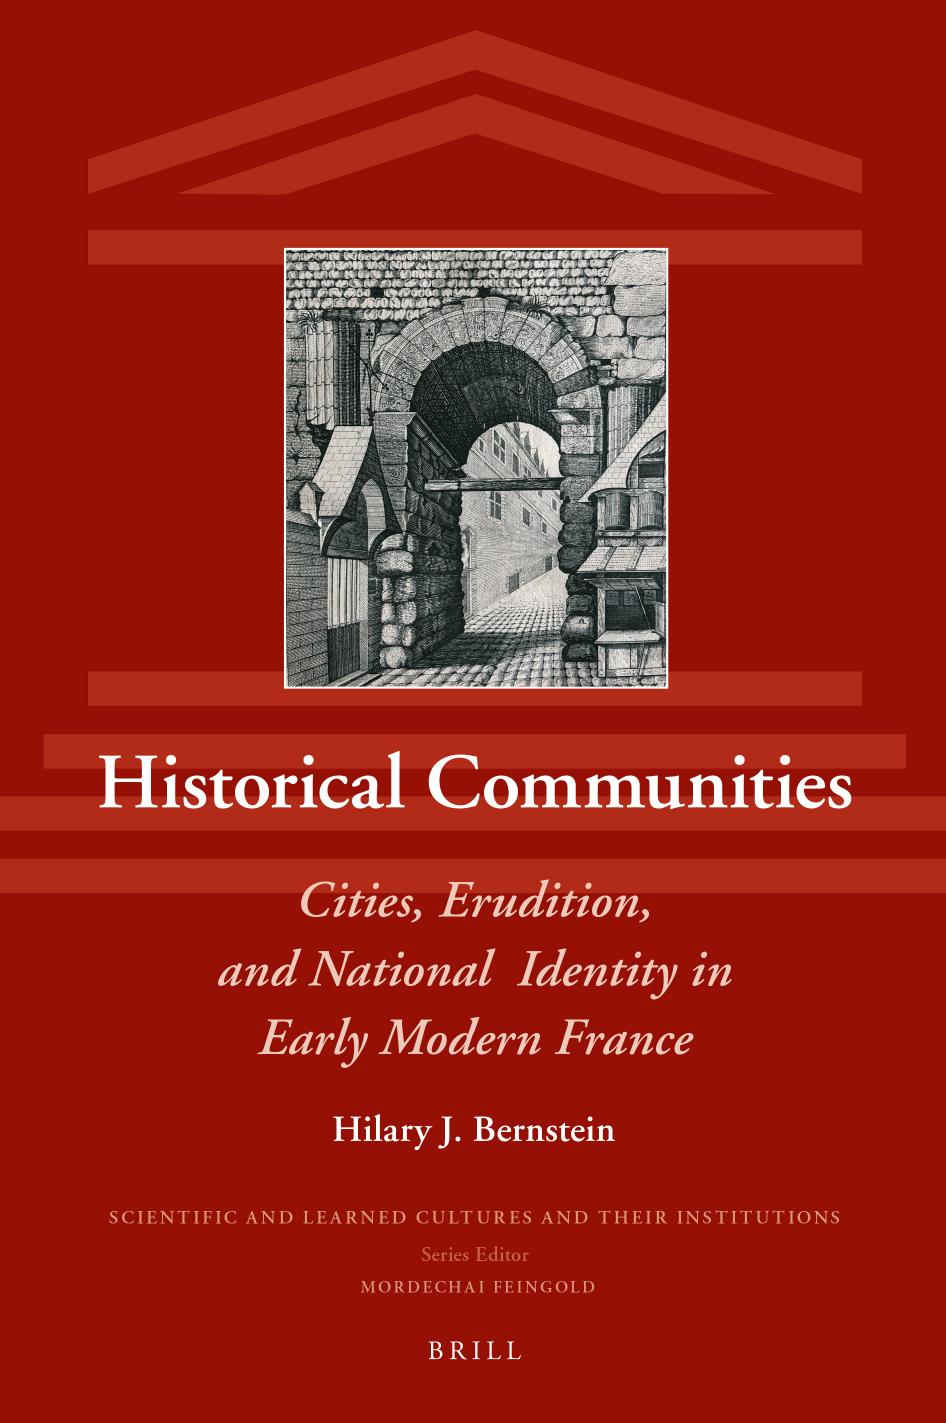 Historical Communities: Cities, Erudition, and National Identity in Early Modernâ¯France by ﻿﻿Hilary J﻿. ﻿Bernstein ﻿﻿